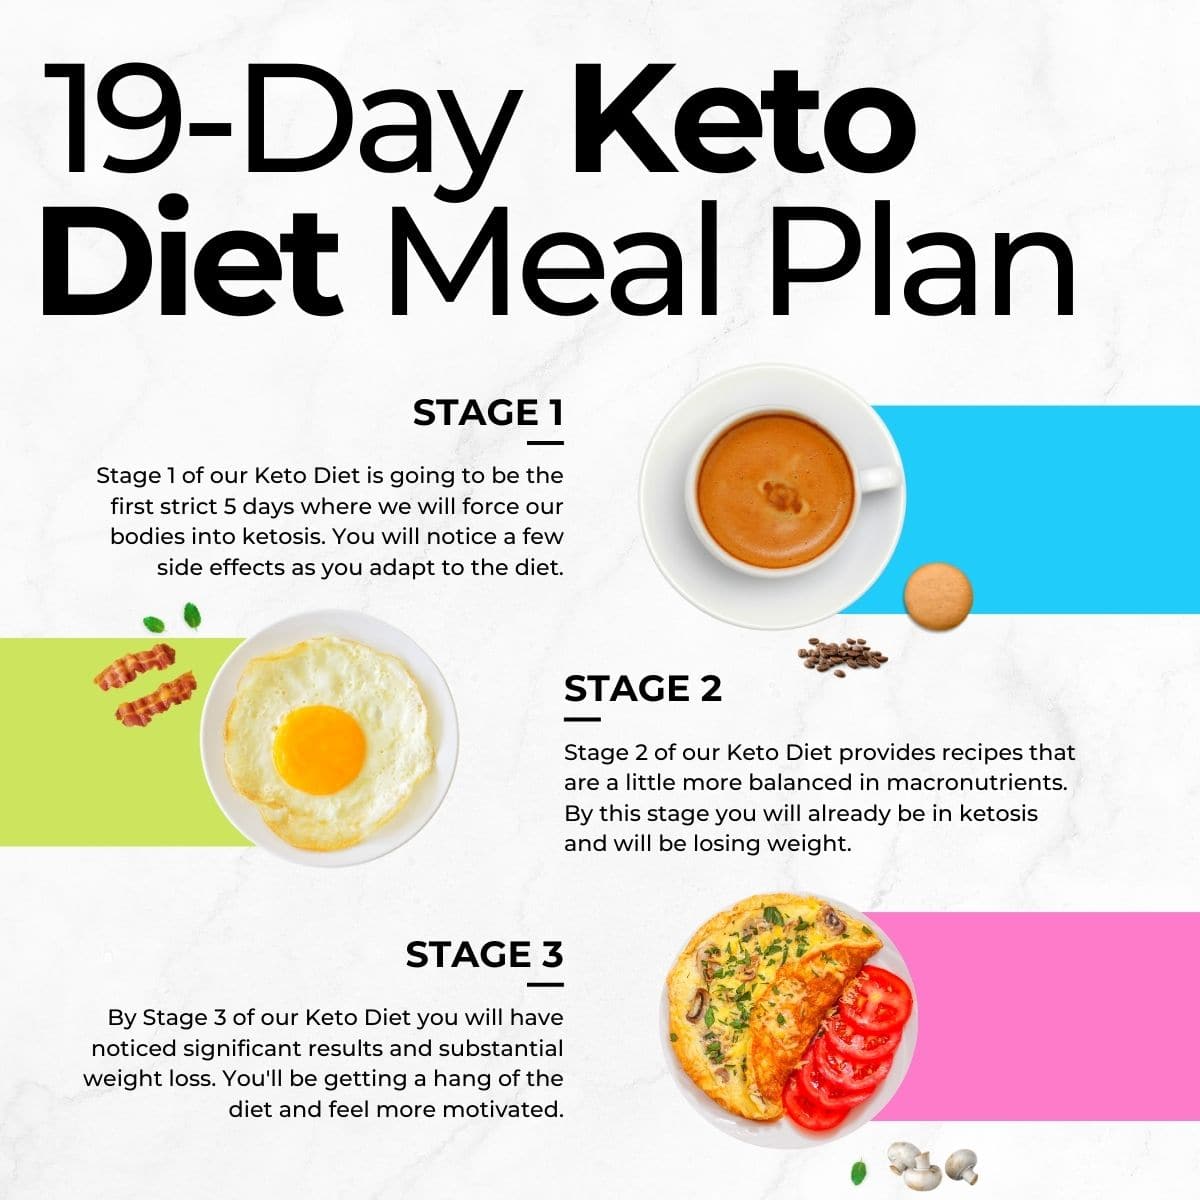 Diet, Nutrition, Weight Loss Tips, Keto Recipes, Meal Plans